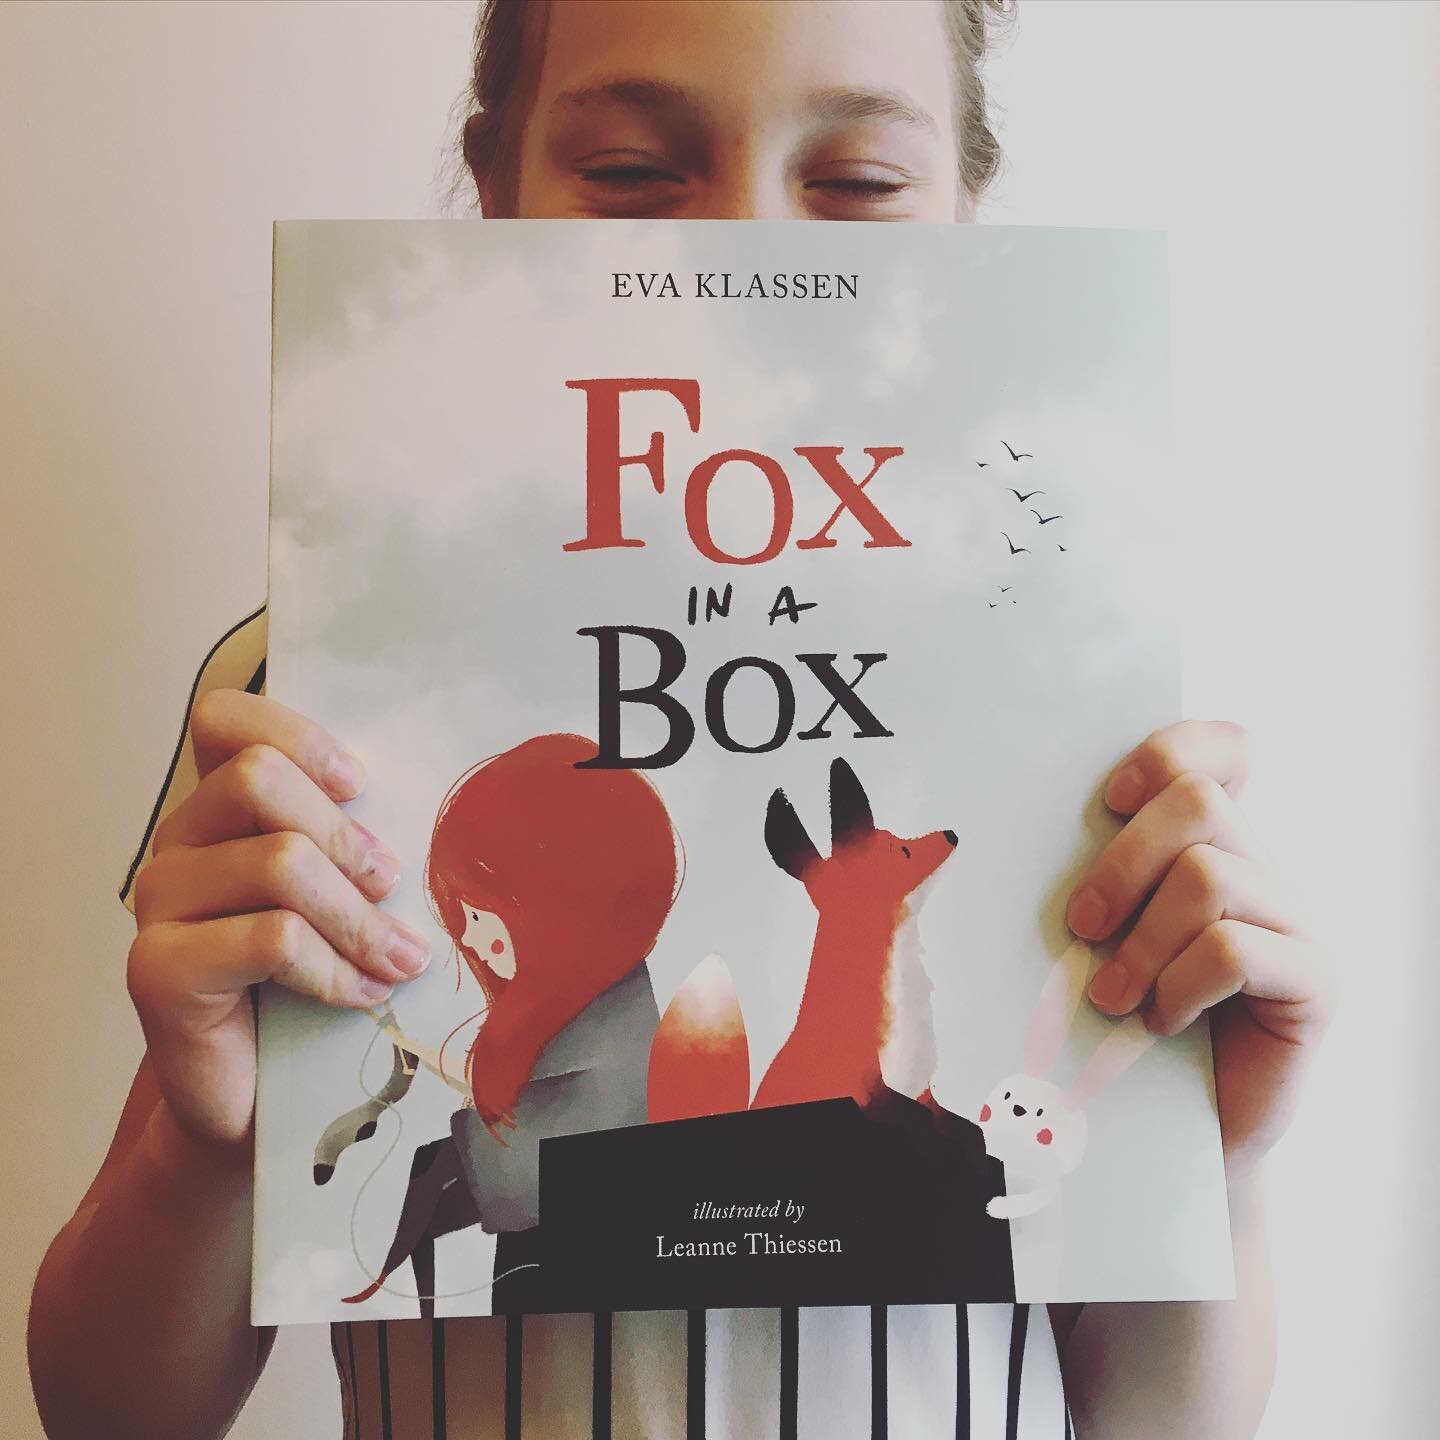 GIVEAWAY | We&rsquo;re kicking off I Love to Read month with a Fox in a Box eBook GIVEAWAY!
.
🦊Visit bigmind.ca to signup to receive your FREE eBook* (link in bio)
.
🦊Get Fox in a Box for free until Midnight Monday, Feb 3rd in whatever Time Zone yo